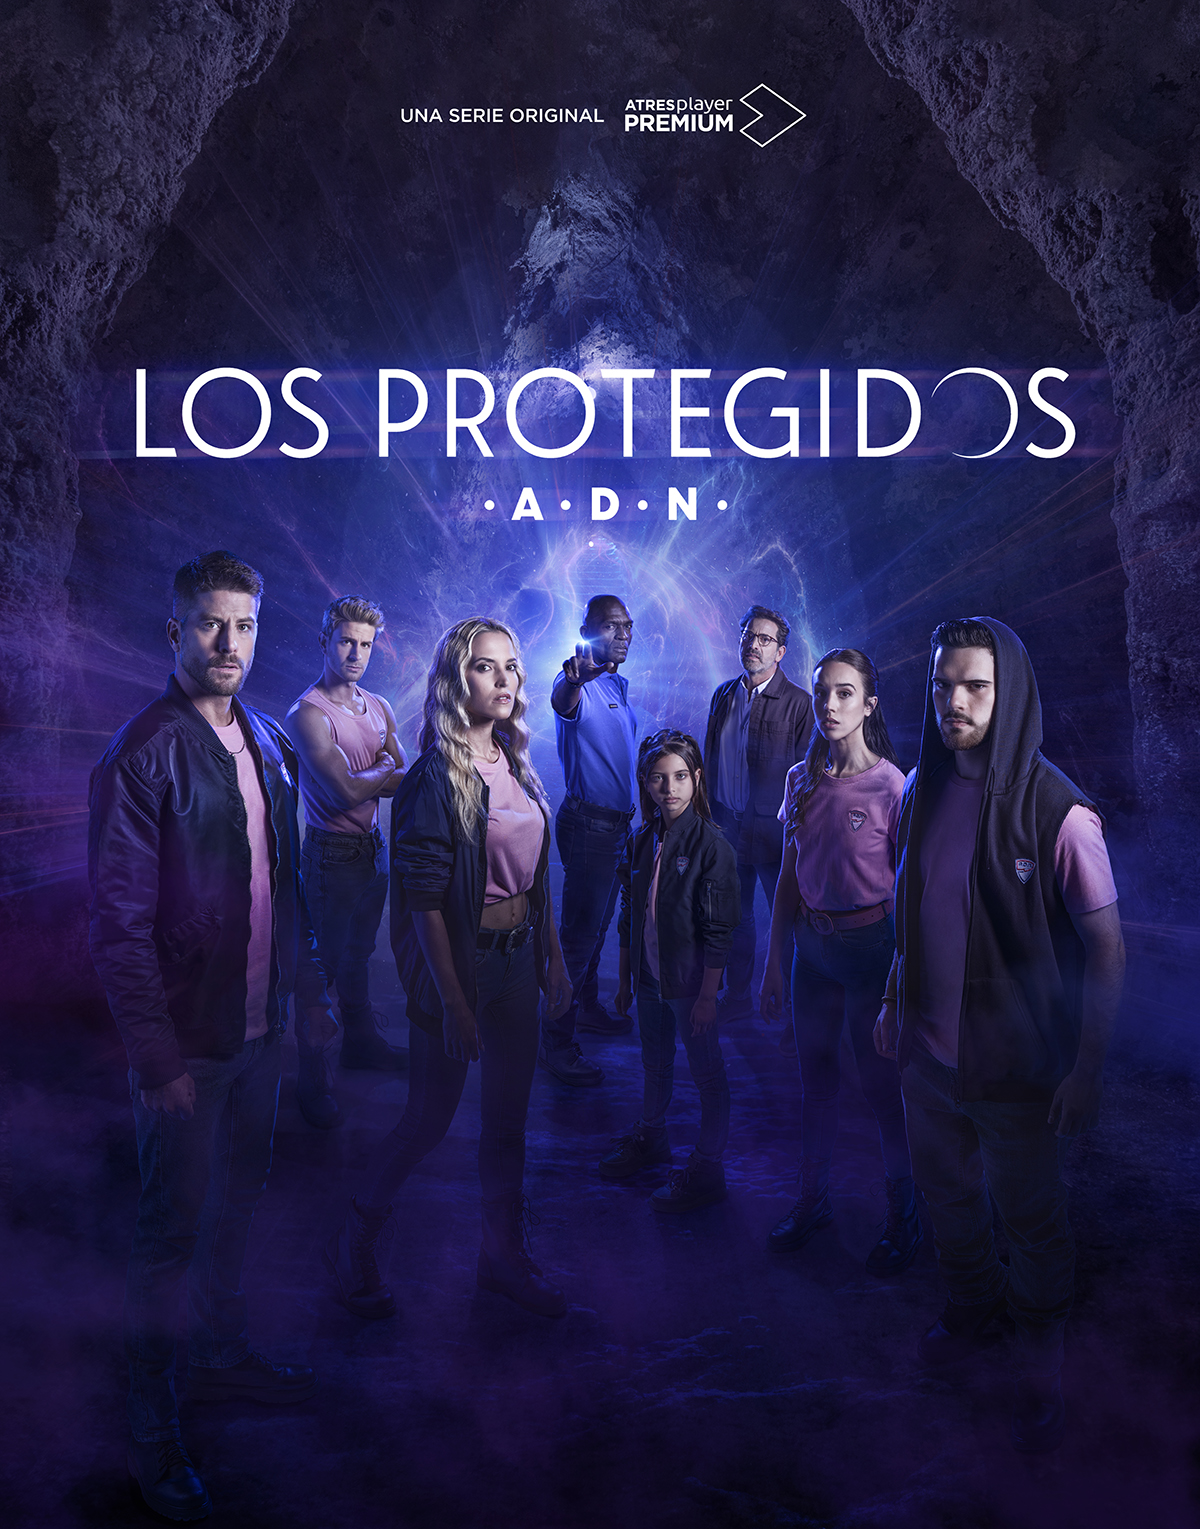 ATRESplayer PREMIUM presents ‘Los Protegidos: A.D.N.’ in the FesTVal and launches the official poster